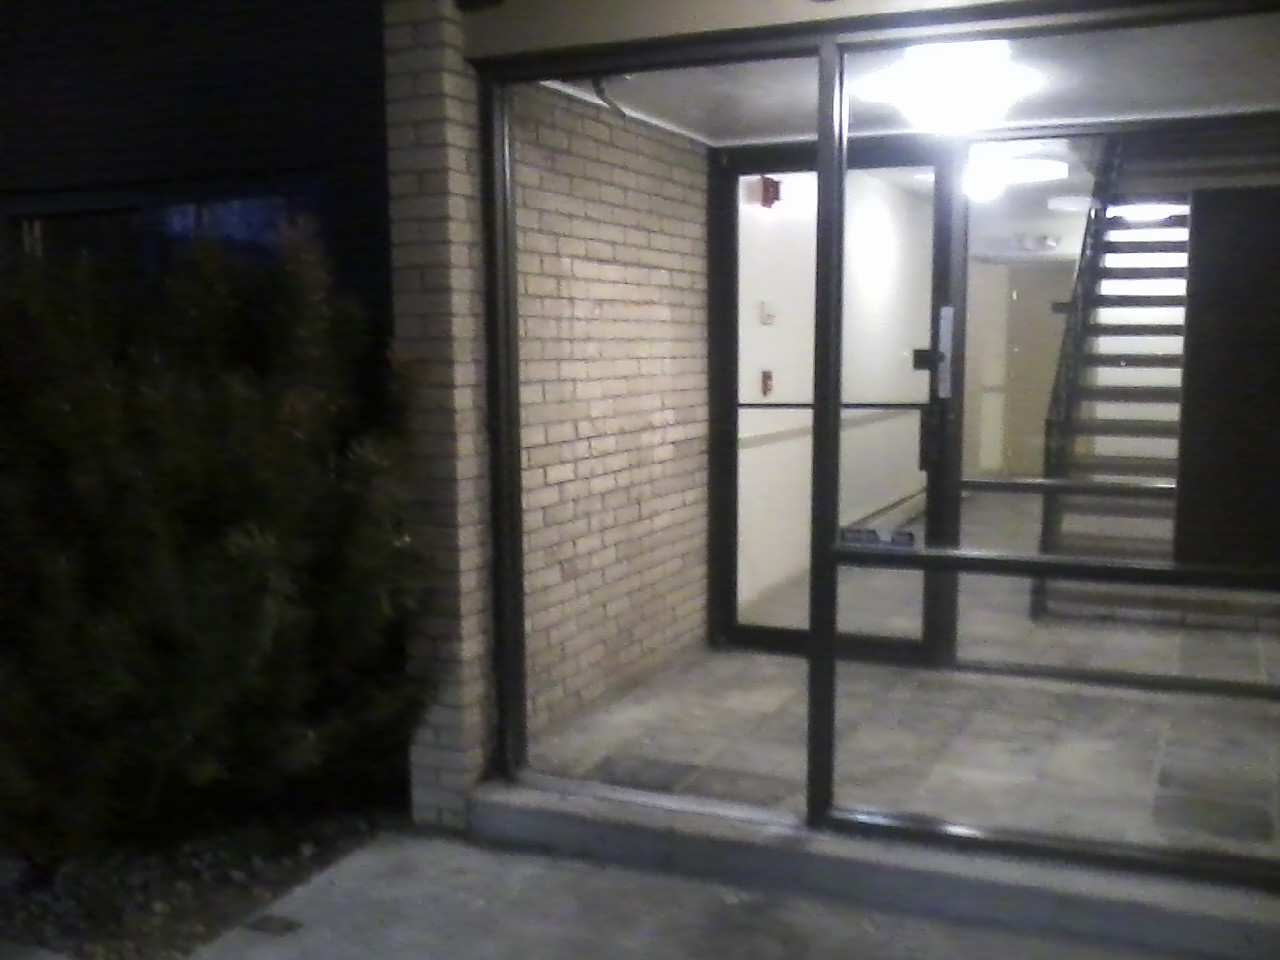 "Security" doors are often propped open, or completely broken/missing, as shown in this photo.